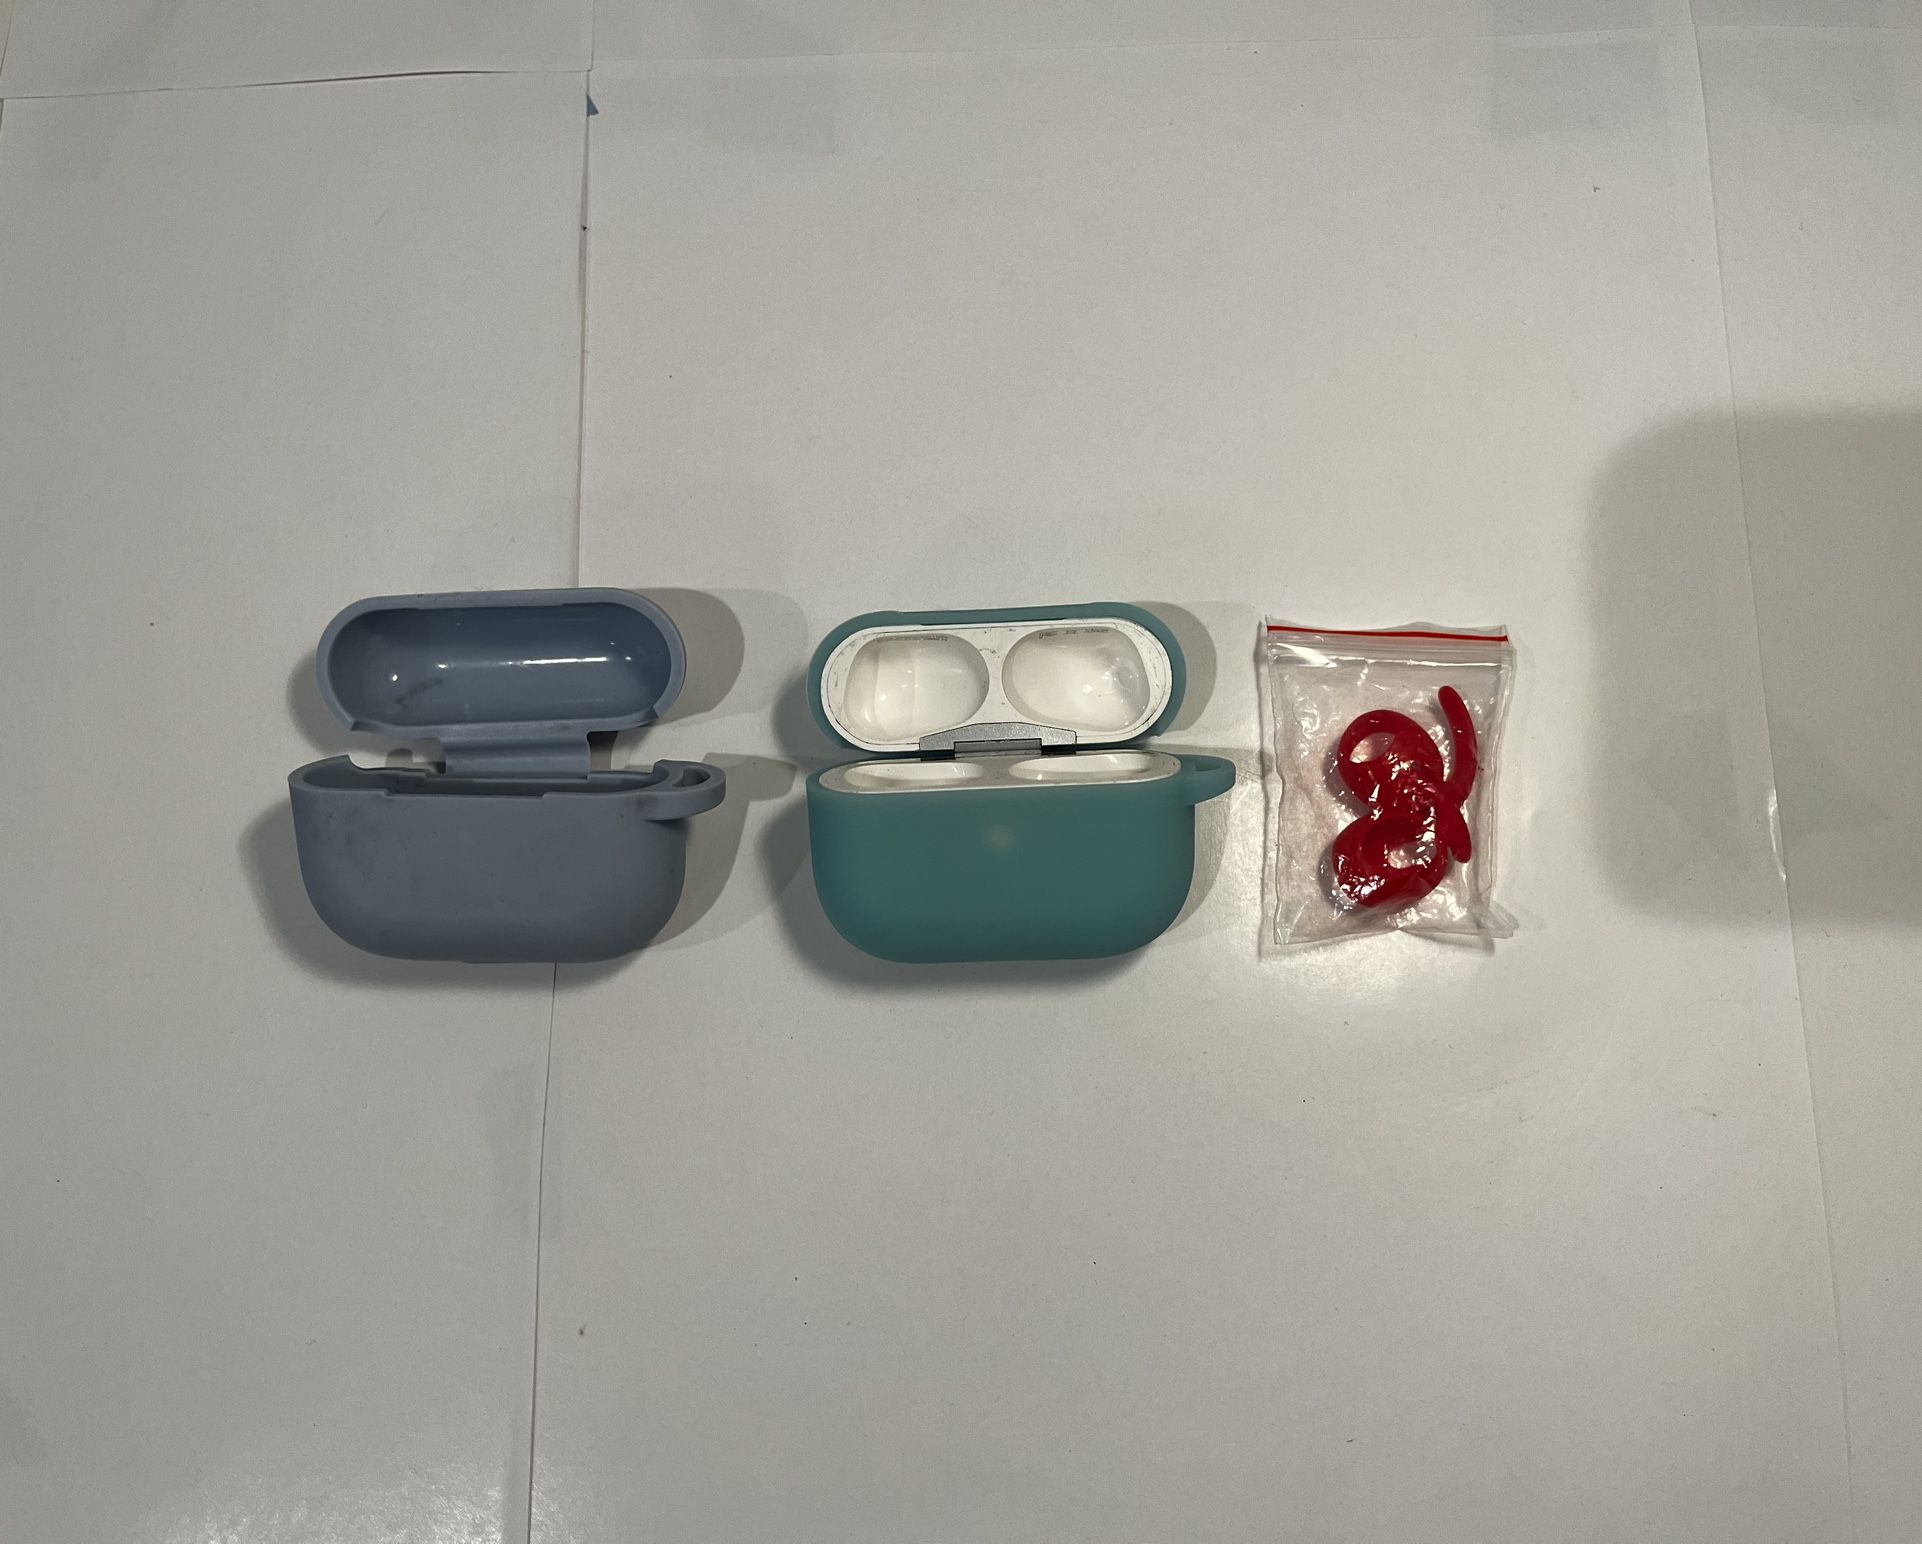 Apple AirPods Case With Left AirPod 2 Three Covers, Sport Tips, And 2 Extra Top Covers. 